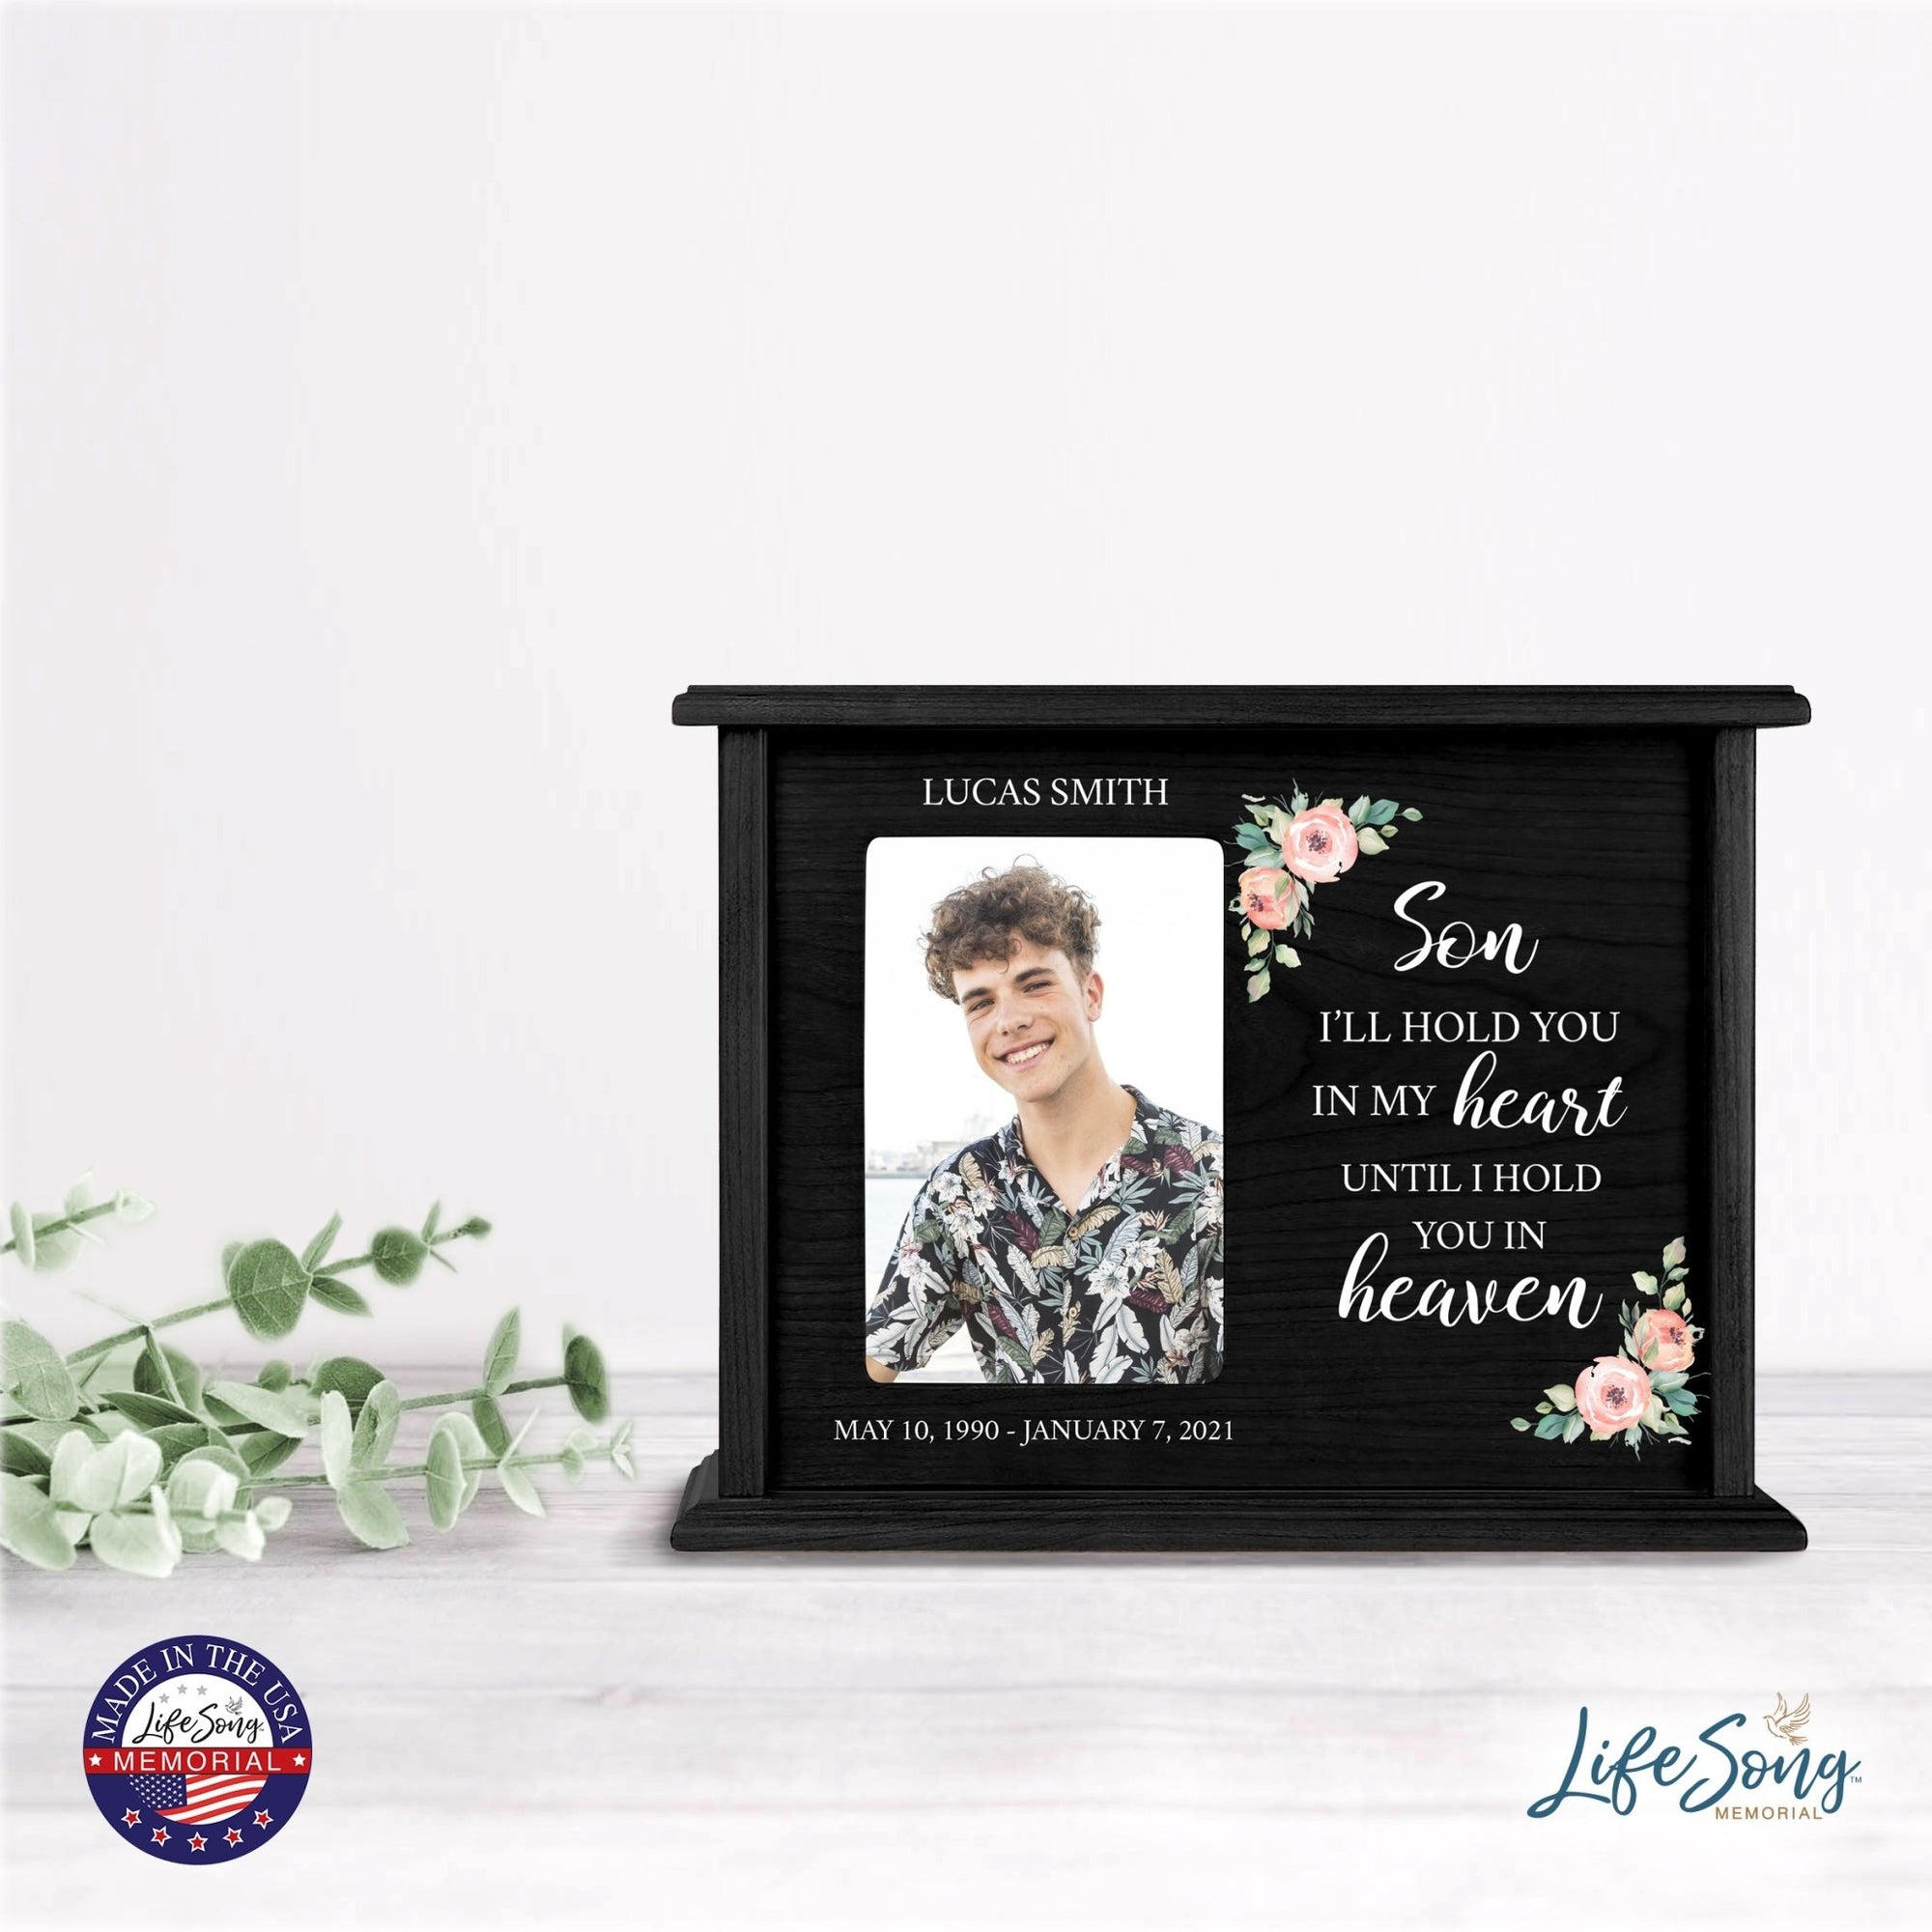 Personalized Memorial Cherry Wood 12 x 4.5 x 9 Cremation Urn Box with Picture Frame holds 200 cu in of Human Ashes and 4x6 Photo - I’ll Hold You In My Heart (Black) - LifeSong Milestones